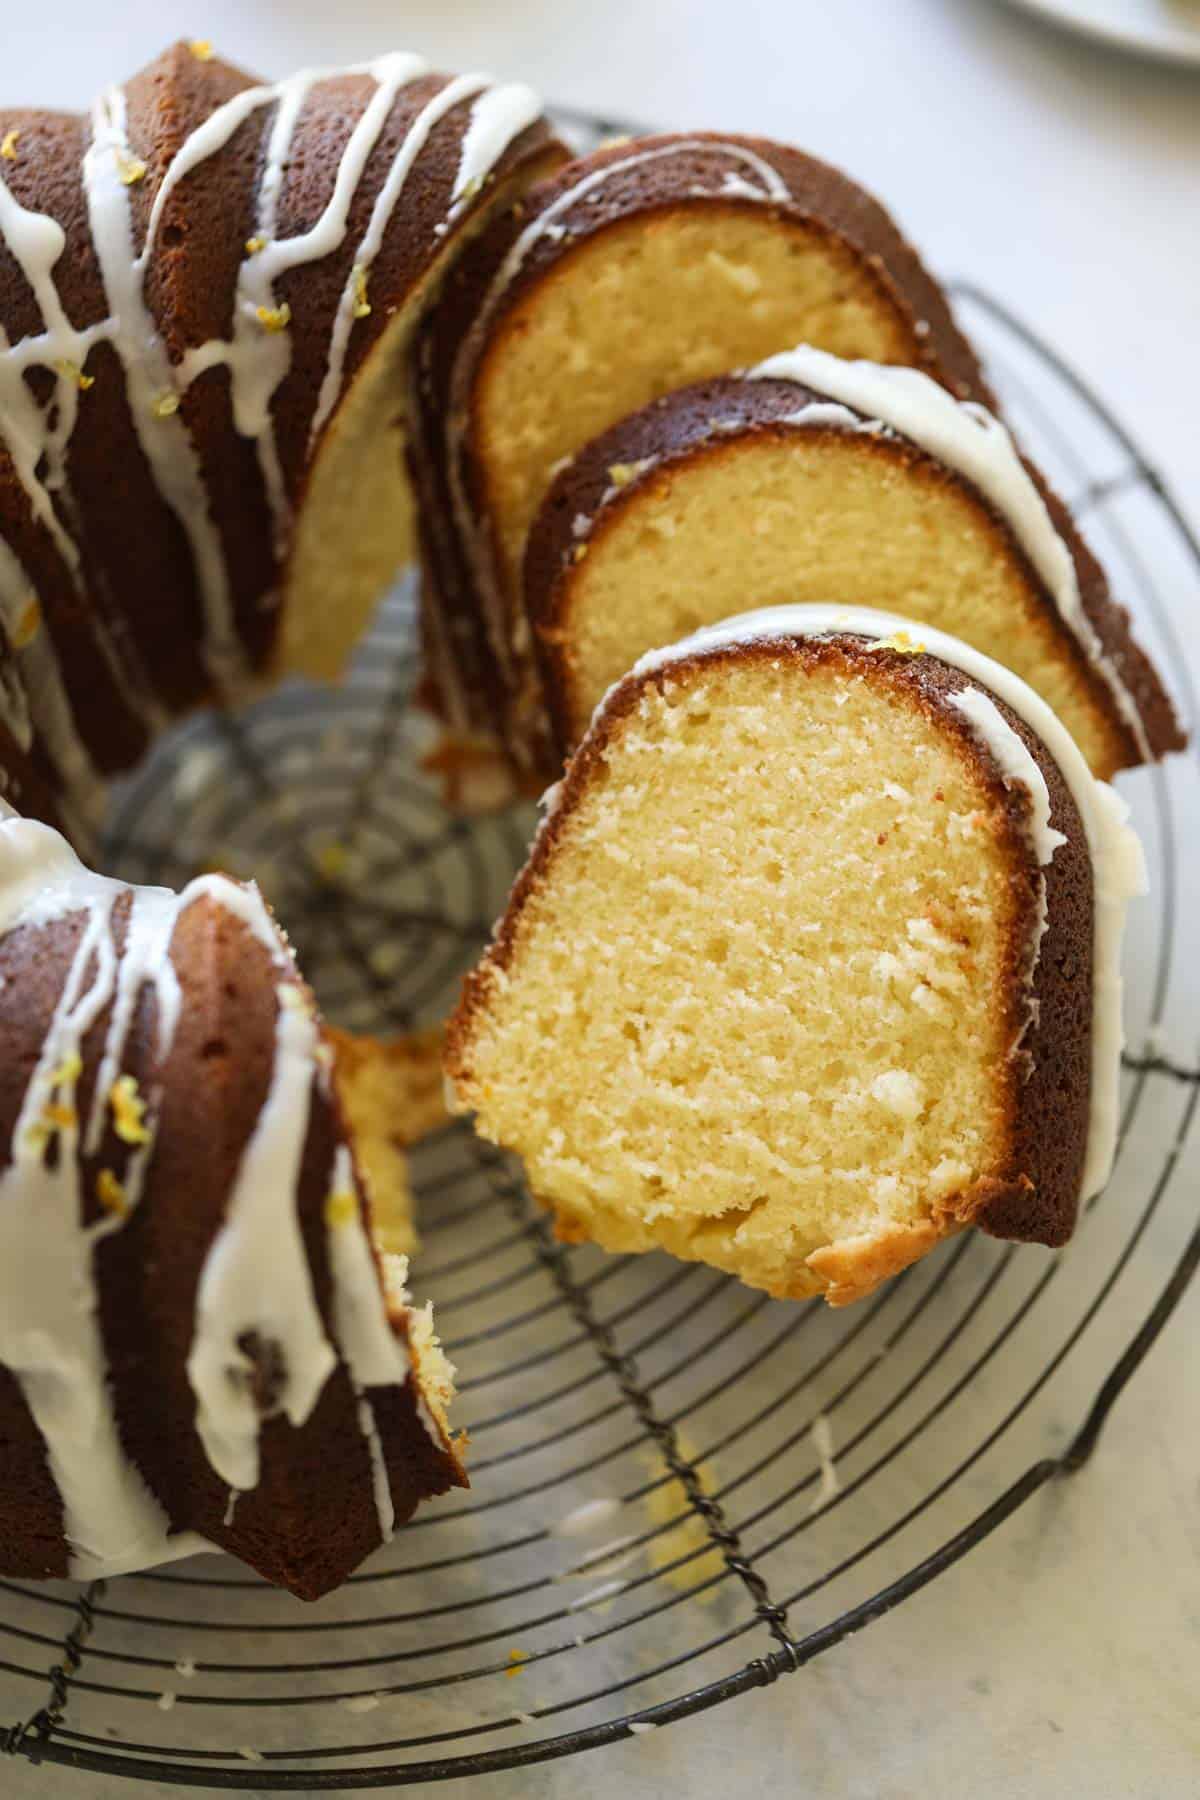 close up of a lemon pound cake sliced showing its textured